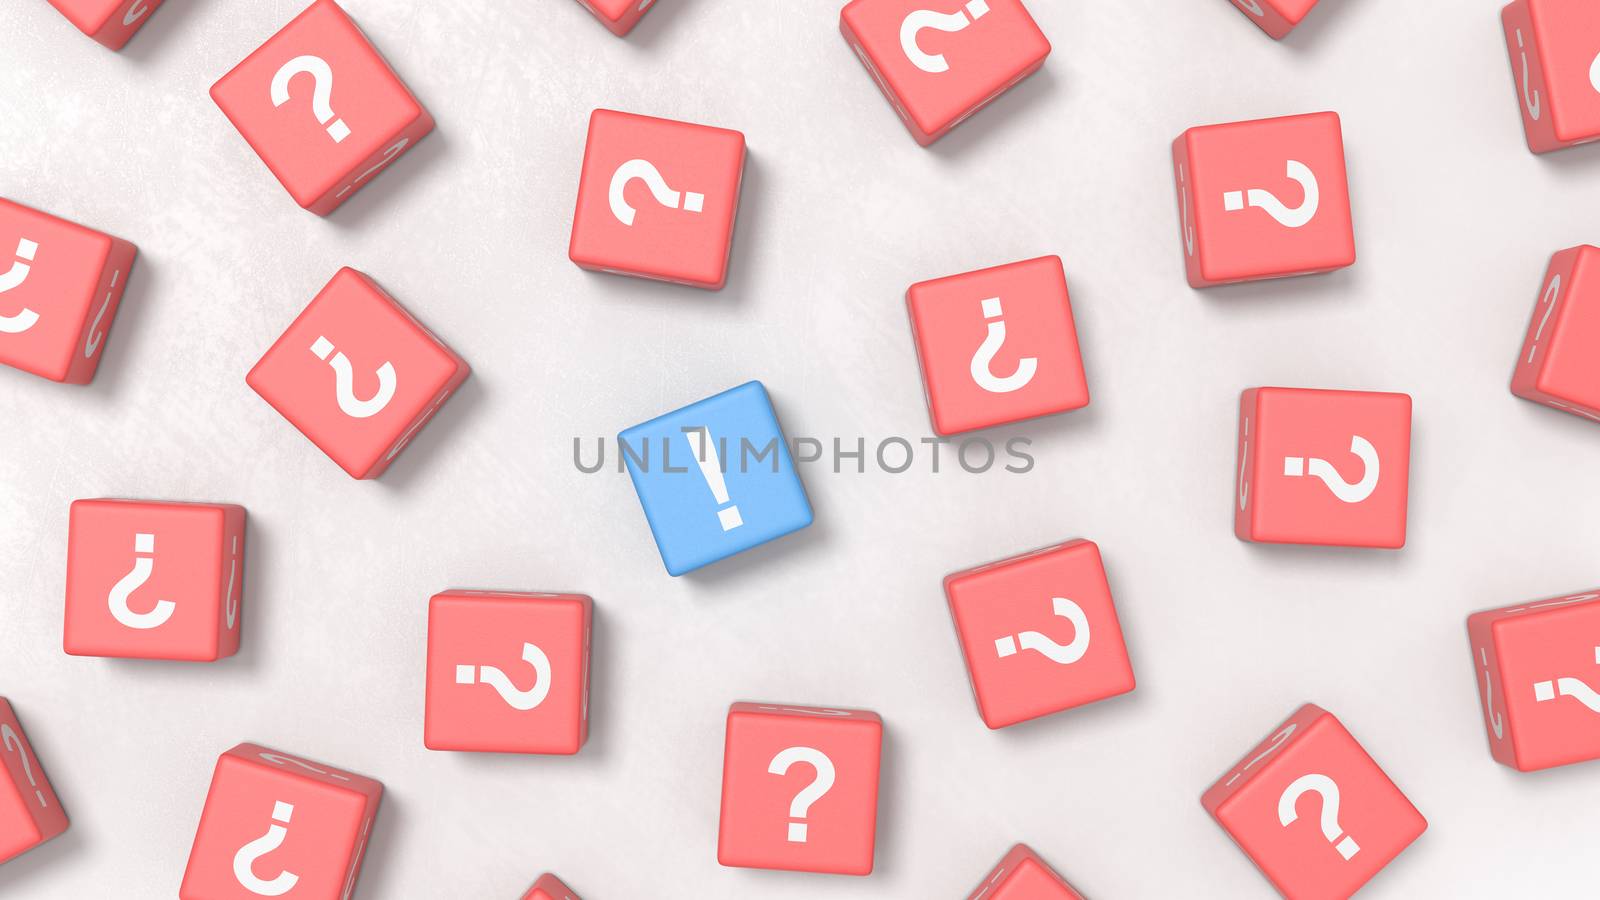 Many Question Mark on Red Cubes and One Exclamation Point on Blue Cube on a Light Gray Plastered Background 3D Illustration